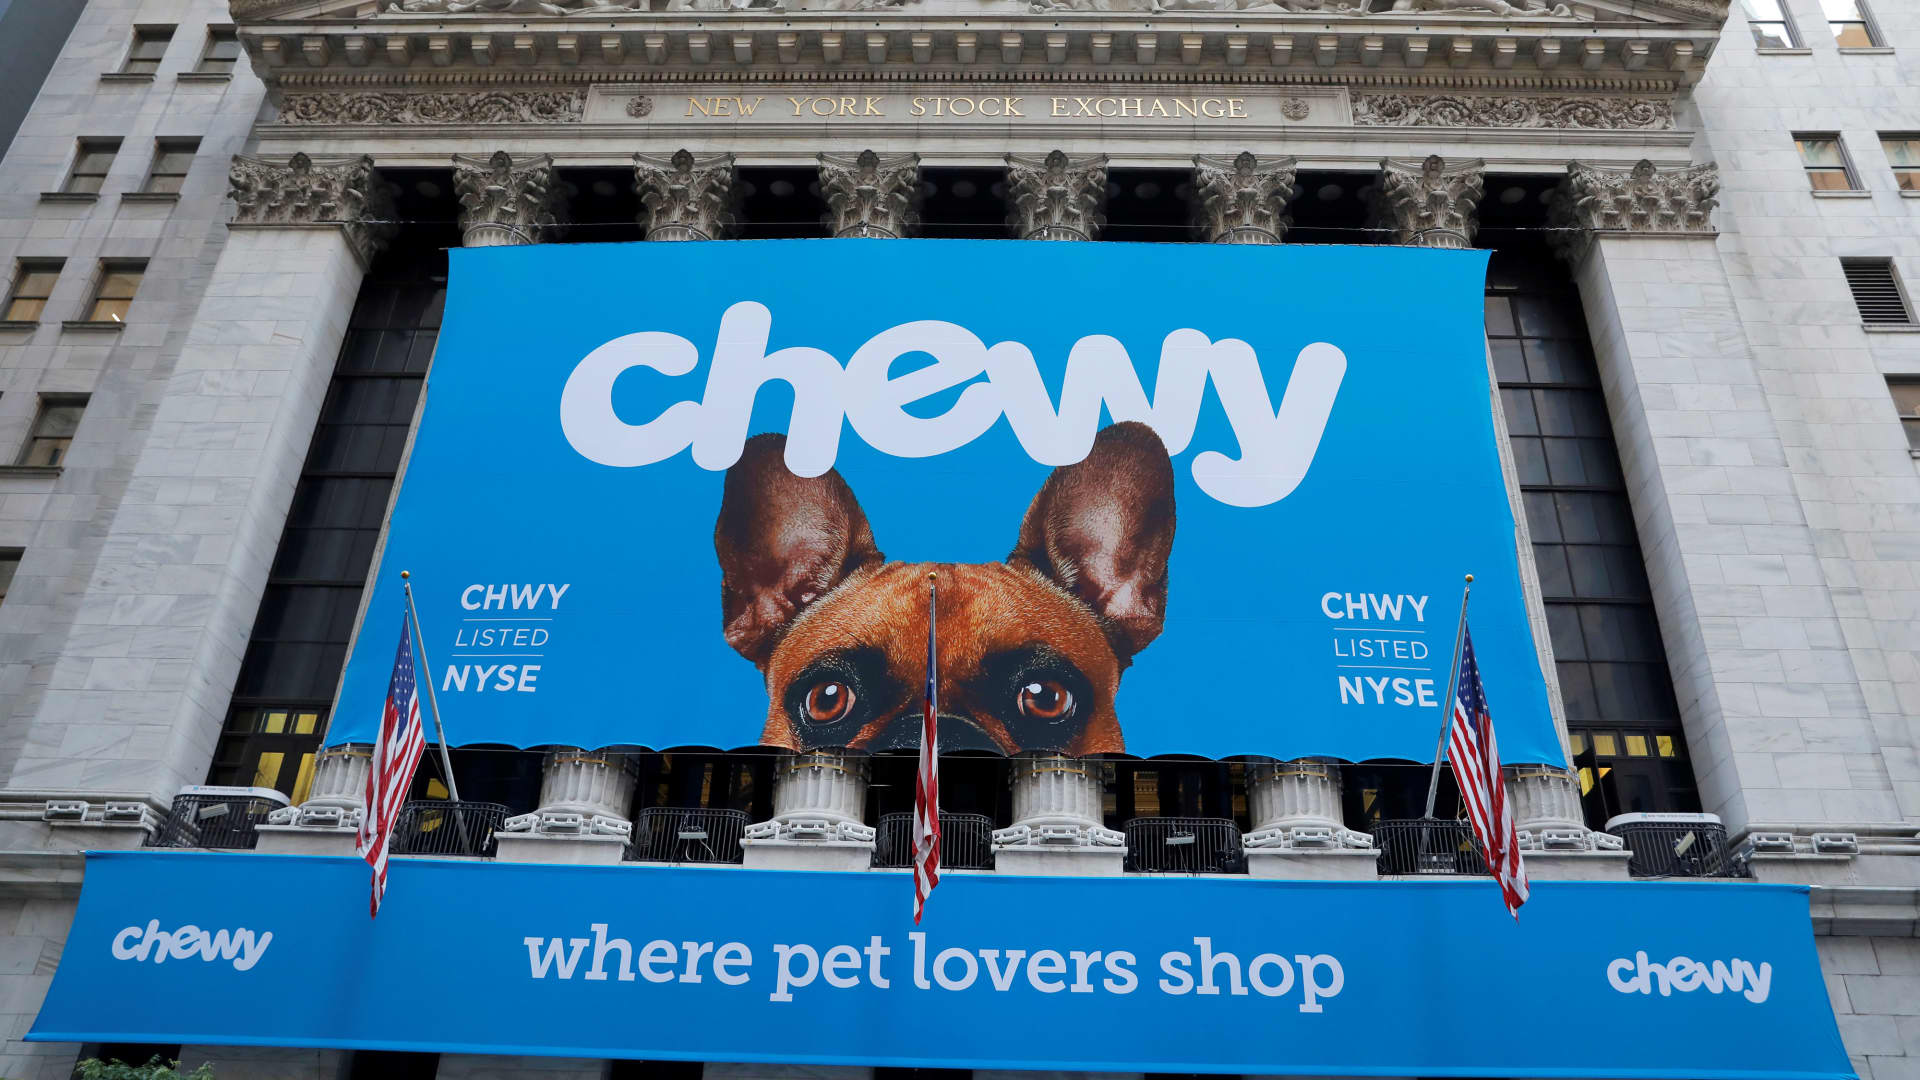 Chewy is at an 'attractive entry point' after its stock pullback this year, Oppenheimer says